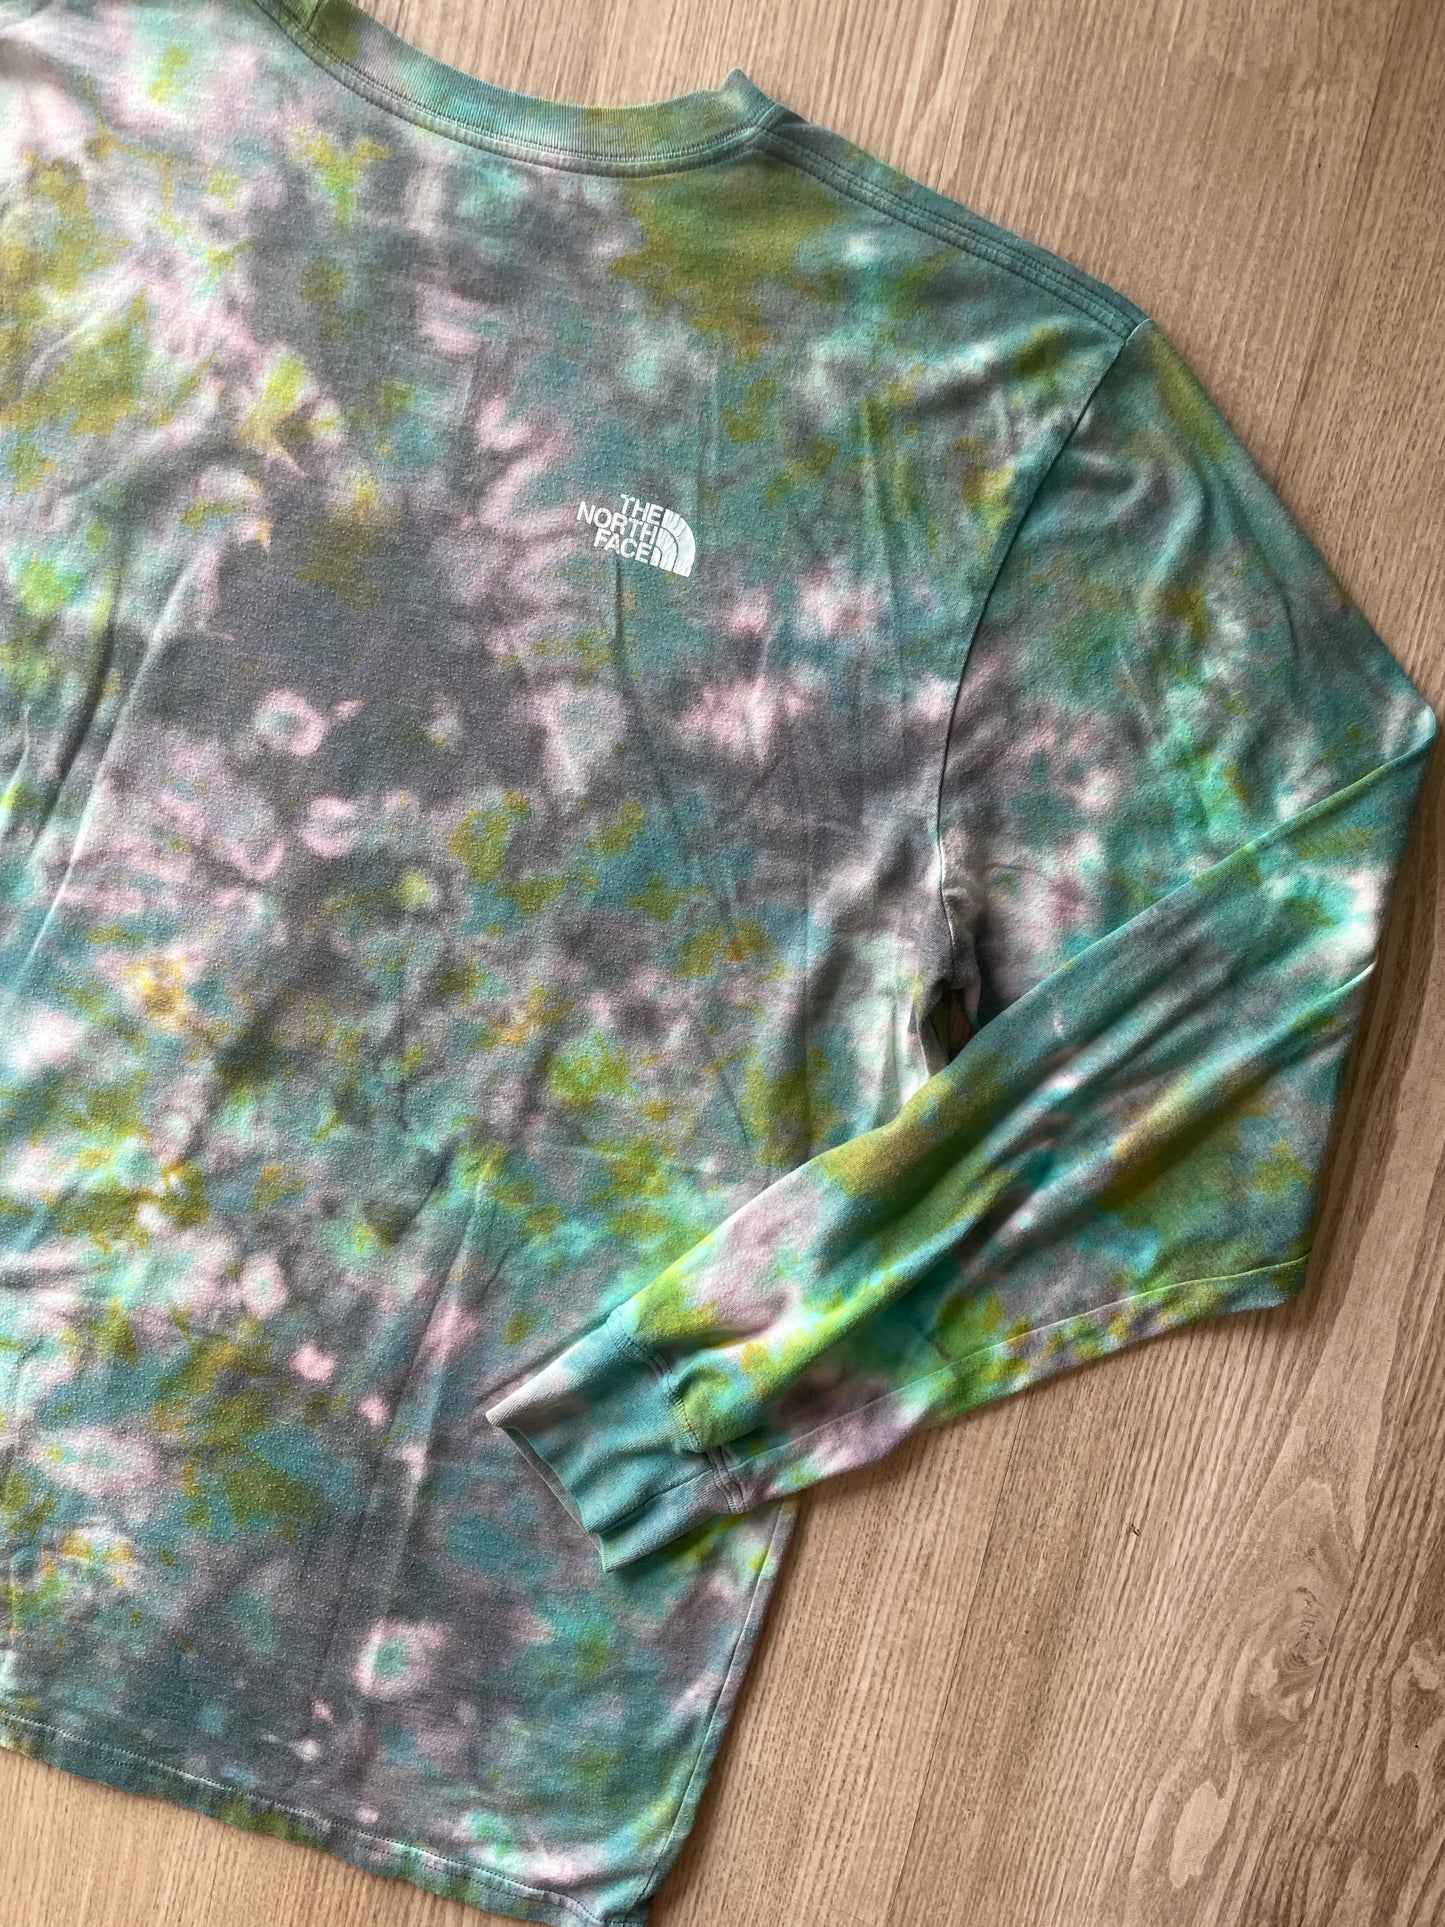 XL Men’s The North Face Desert Landscape Handmade Tie Dye T-Shirt | One-Of-a-Kind Shades of Green Earth Tones Long Sleeve